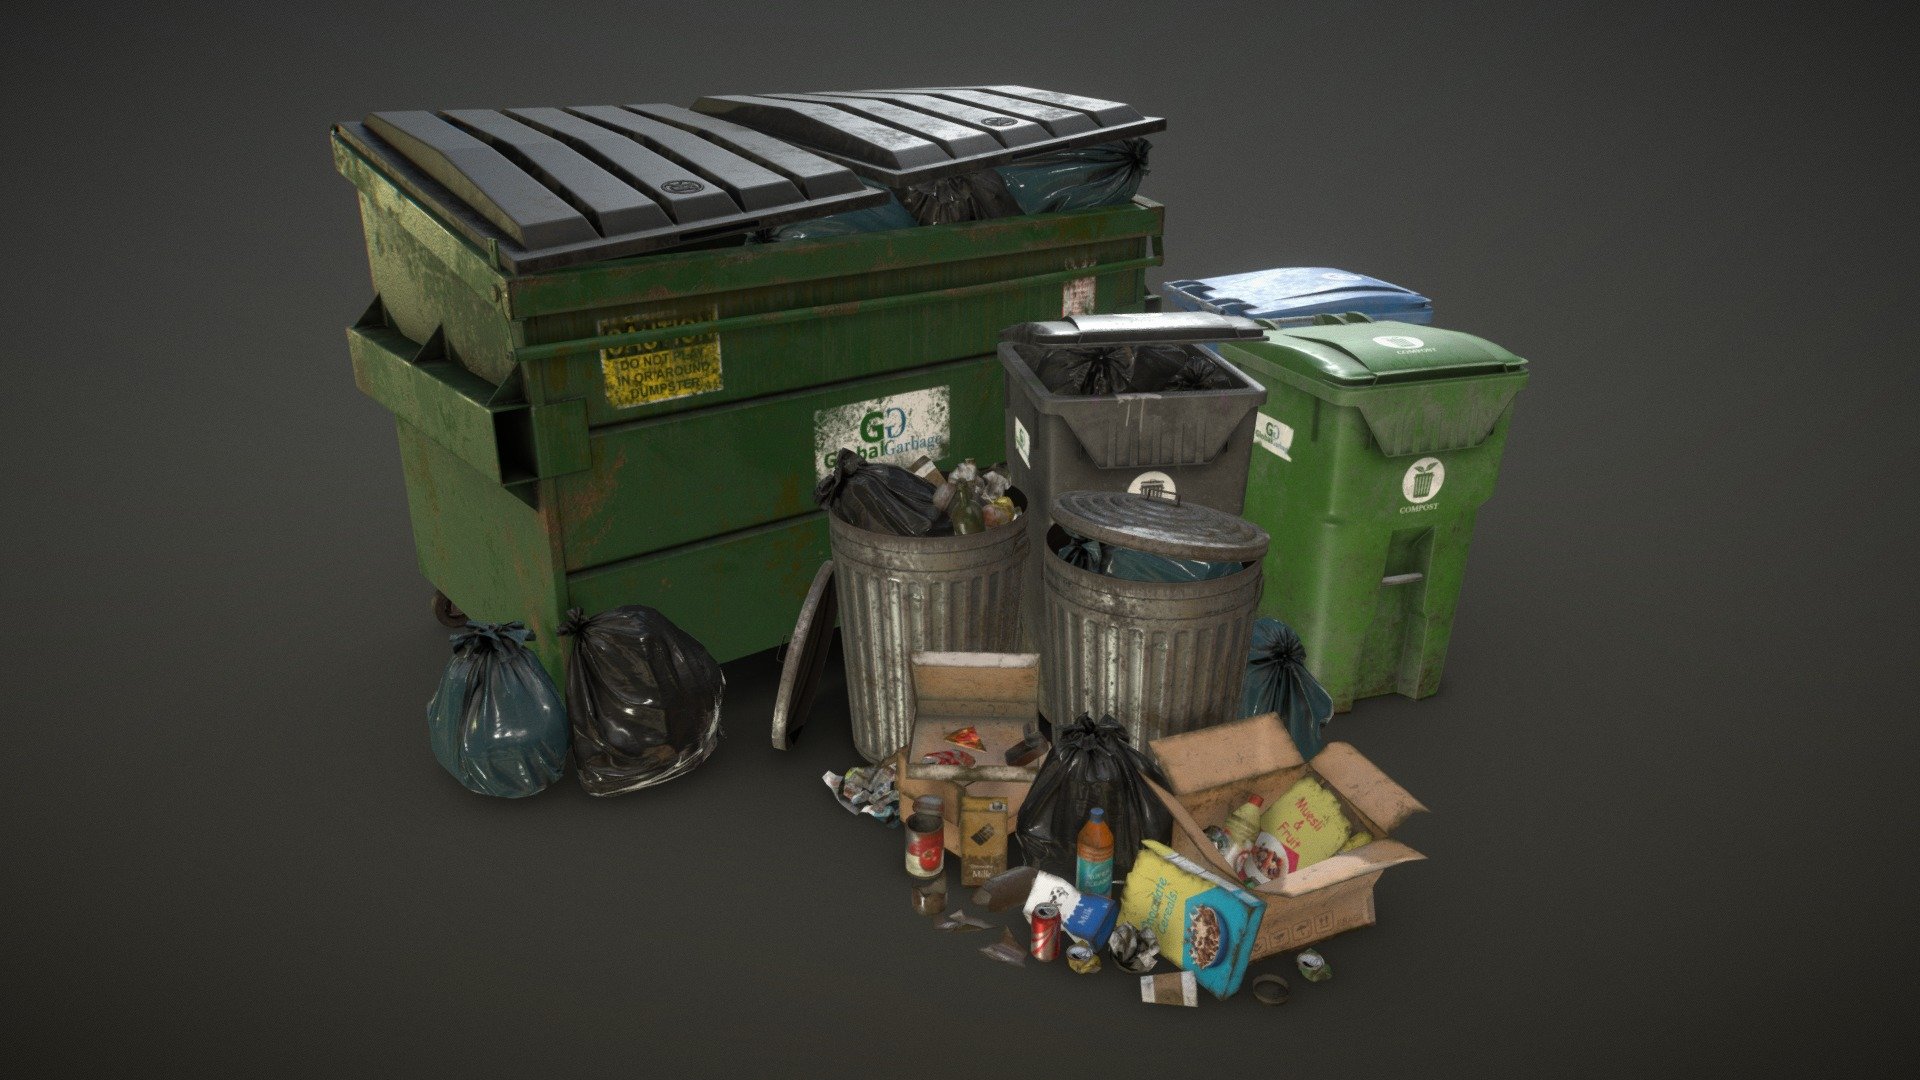 Low Poly pack of game ready models of trash with PBR textures:

Textures included: Albedo, Normals, Metalness, Roughness, AO and Opacity

Pack includes: 




Dumpsters: 4096 texture / 2 different colors / 2 levels of dirt

Trash Cans: 4096 texture / 3 levels of dirt

Trash Bins: 4096 texture / 3 different colors / 2 levels of dirt
Urban Trash: 3 carboard boxes - 2 cereal boxes - 3 cartons of milk - 4 papers with 4 levels of crumpling - 4 types of tins - 1 coffee cup - 2 wine bottles - 2 broken bottles - 3 soda cans / 4 levels of crushing - 2 plastic bottles - 1 pizza box - 1 piece of pizza: 4096 texture / 2 leves of dirt

2 Garbage Bags: 4096 texture / 3 different colors

Polys of collection: 40962
Polys of scene: 23094

Files included: 




Urban Trash Pack Vol.3 Scene - Objects included as seen in preview

Urban Trash Pack Vol.3 Kit - All objects included in pack

This model can be used for any game, personal project, etc. You may not resell any content

 - Urban Trash Pack Vol 3 - Low Poly - Buy Royalty Free 3D model by MSWoodvine 3d model